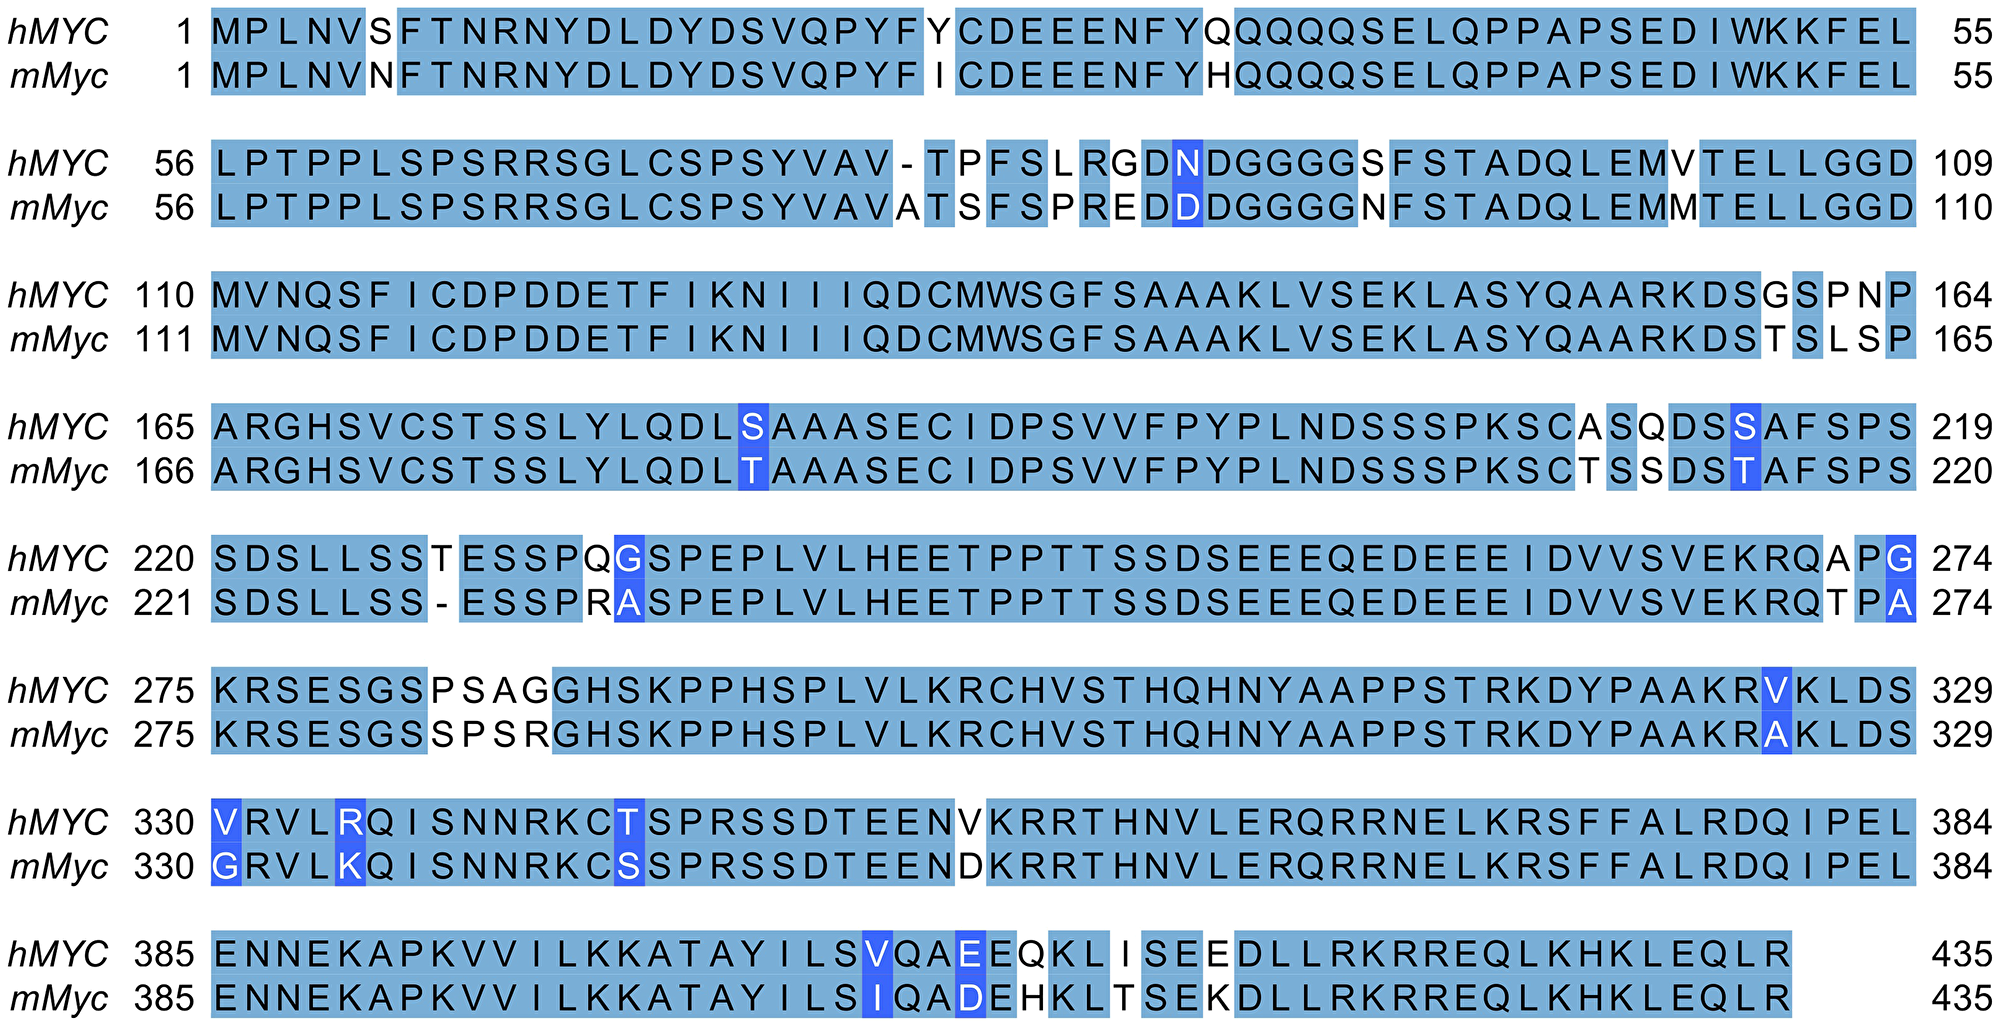 Alignment of human and murine MYC proteins.